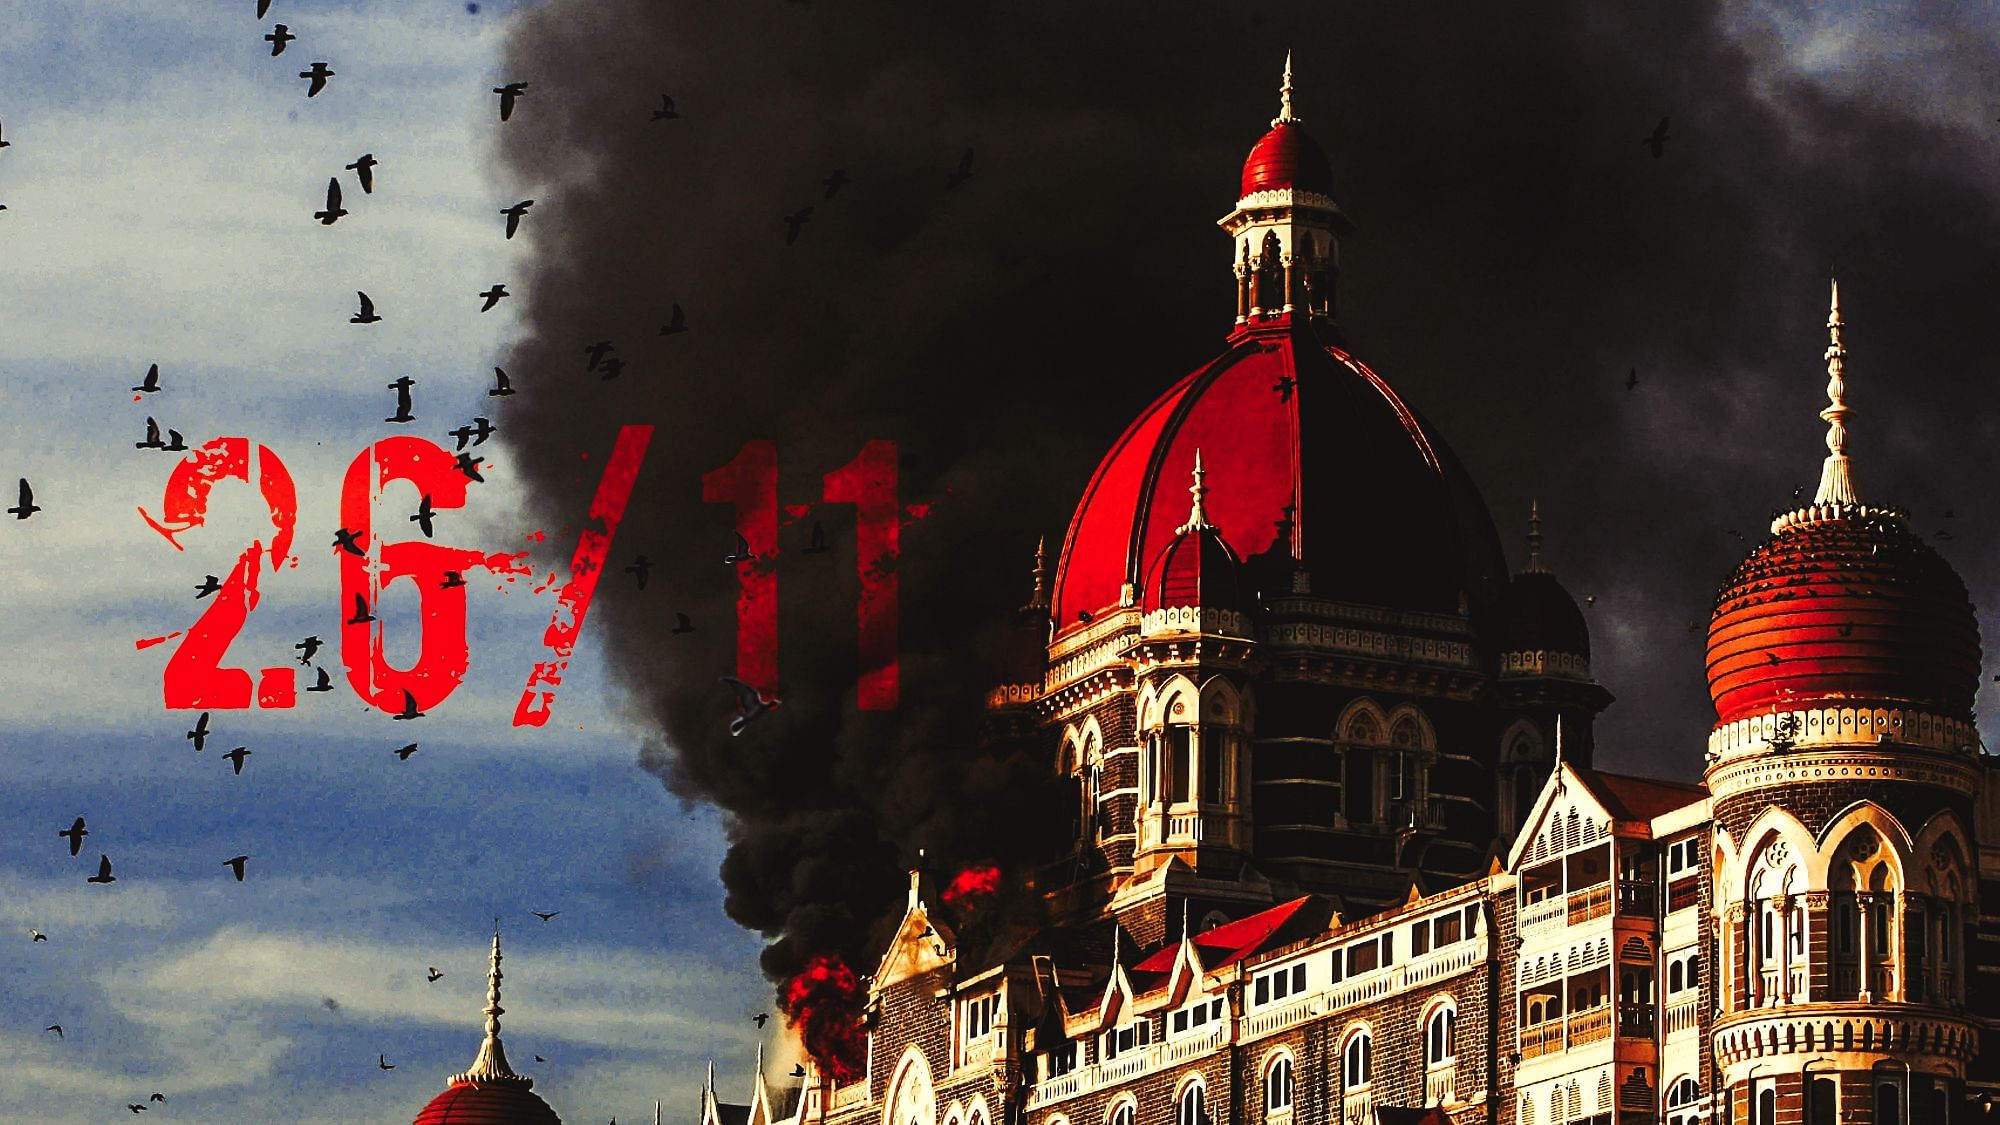 <div class="paragraphs"><p>As many as 166 people were killed and more than 300 injured in the 26/11 terrorist attacks in Mumbai in 2008.</p></div>